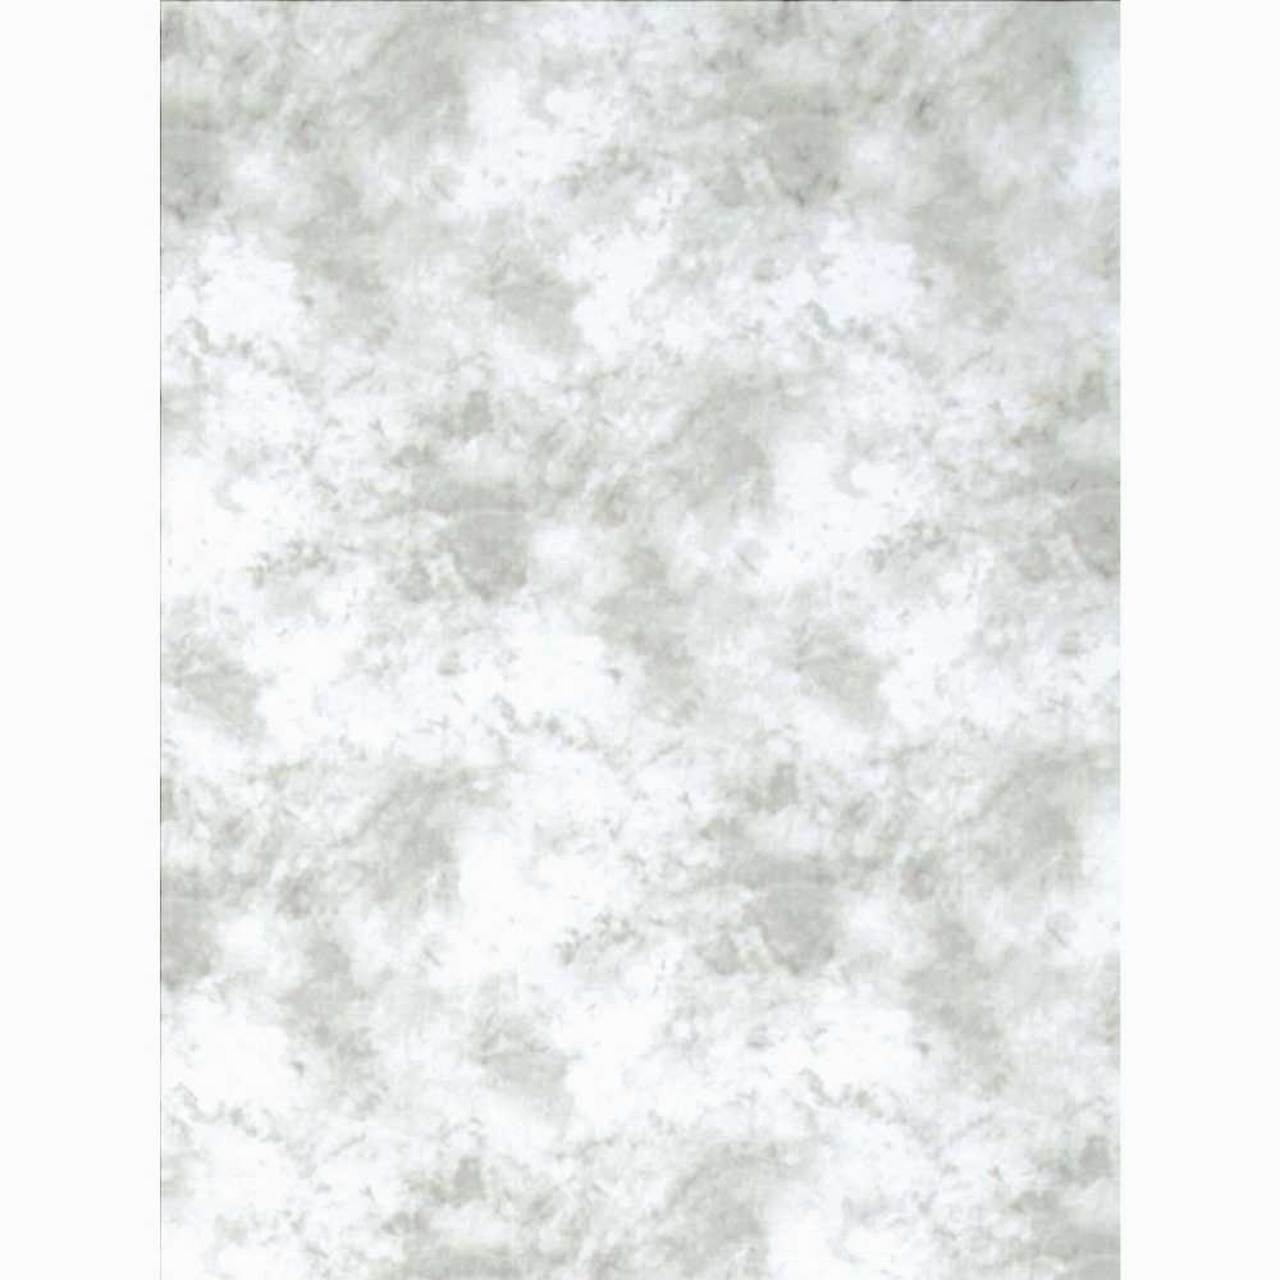 Promaster 9199 10x12' Cloud Dyed Cloth Background (Light Grey)